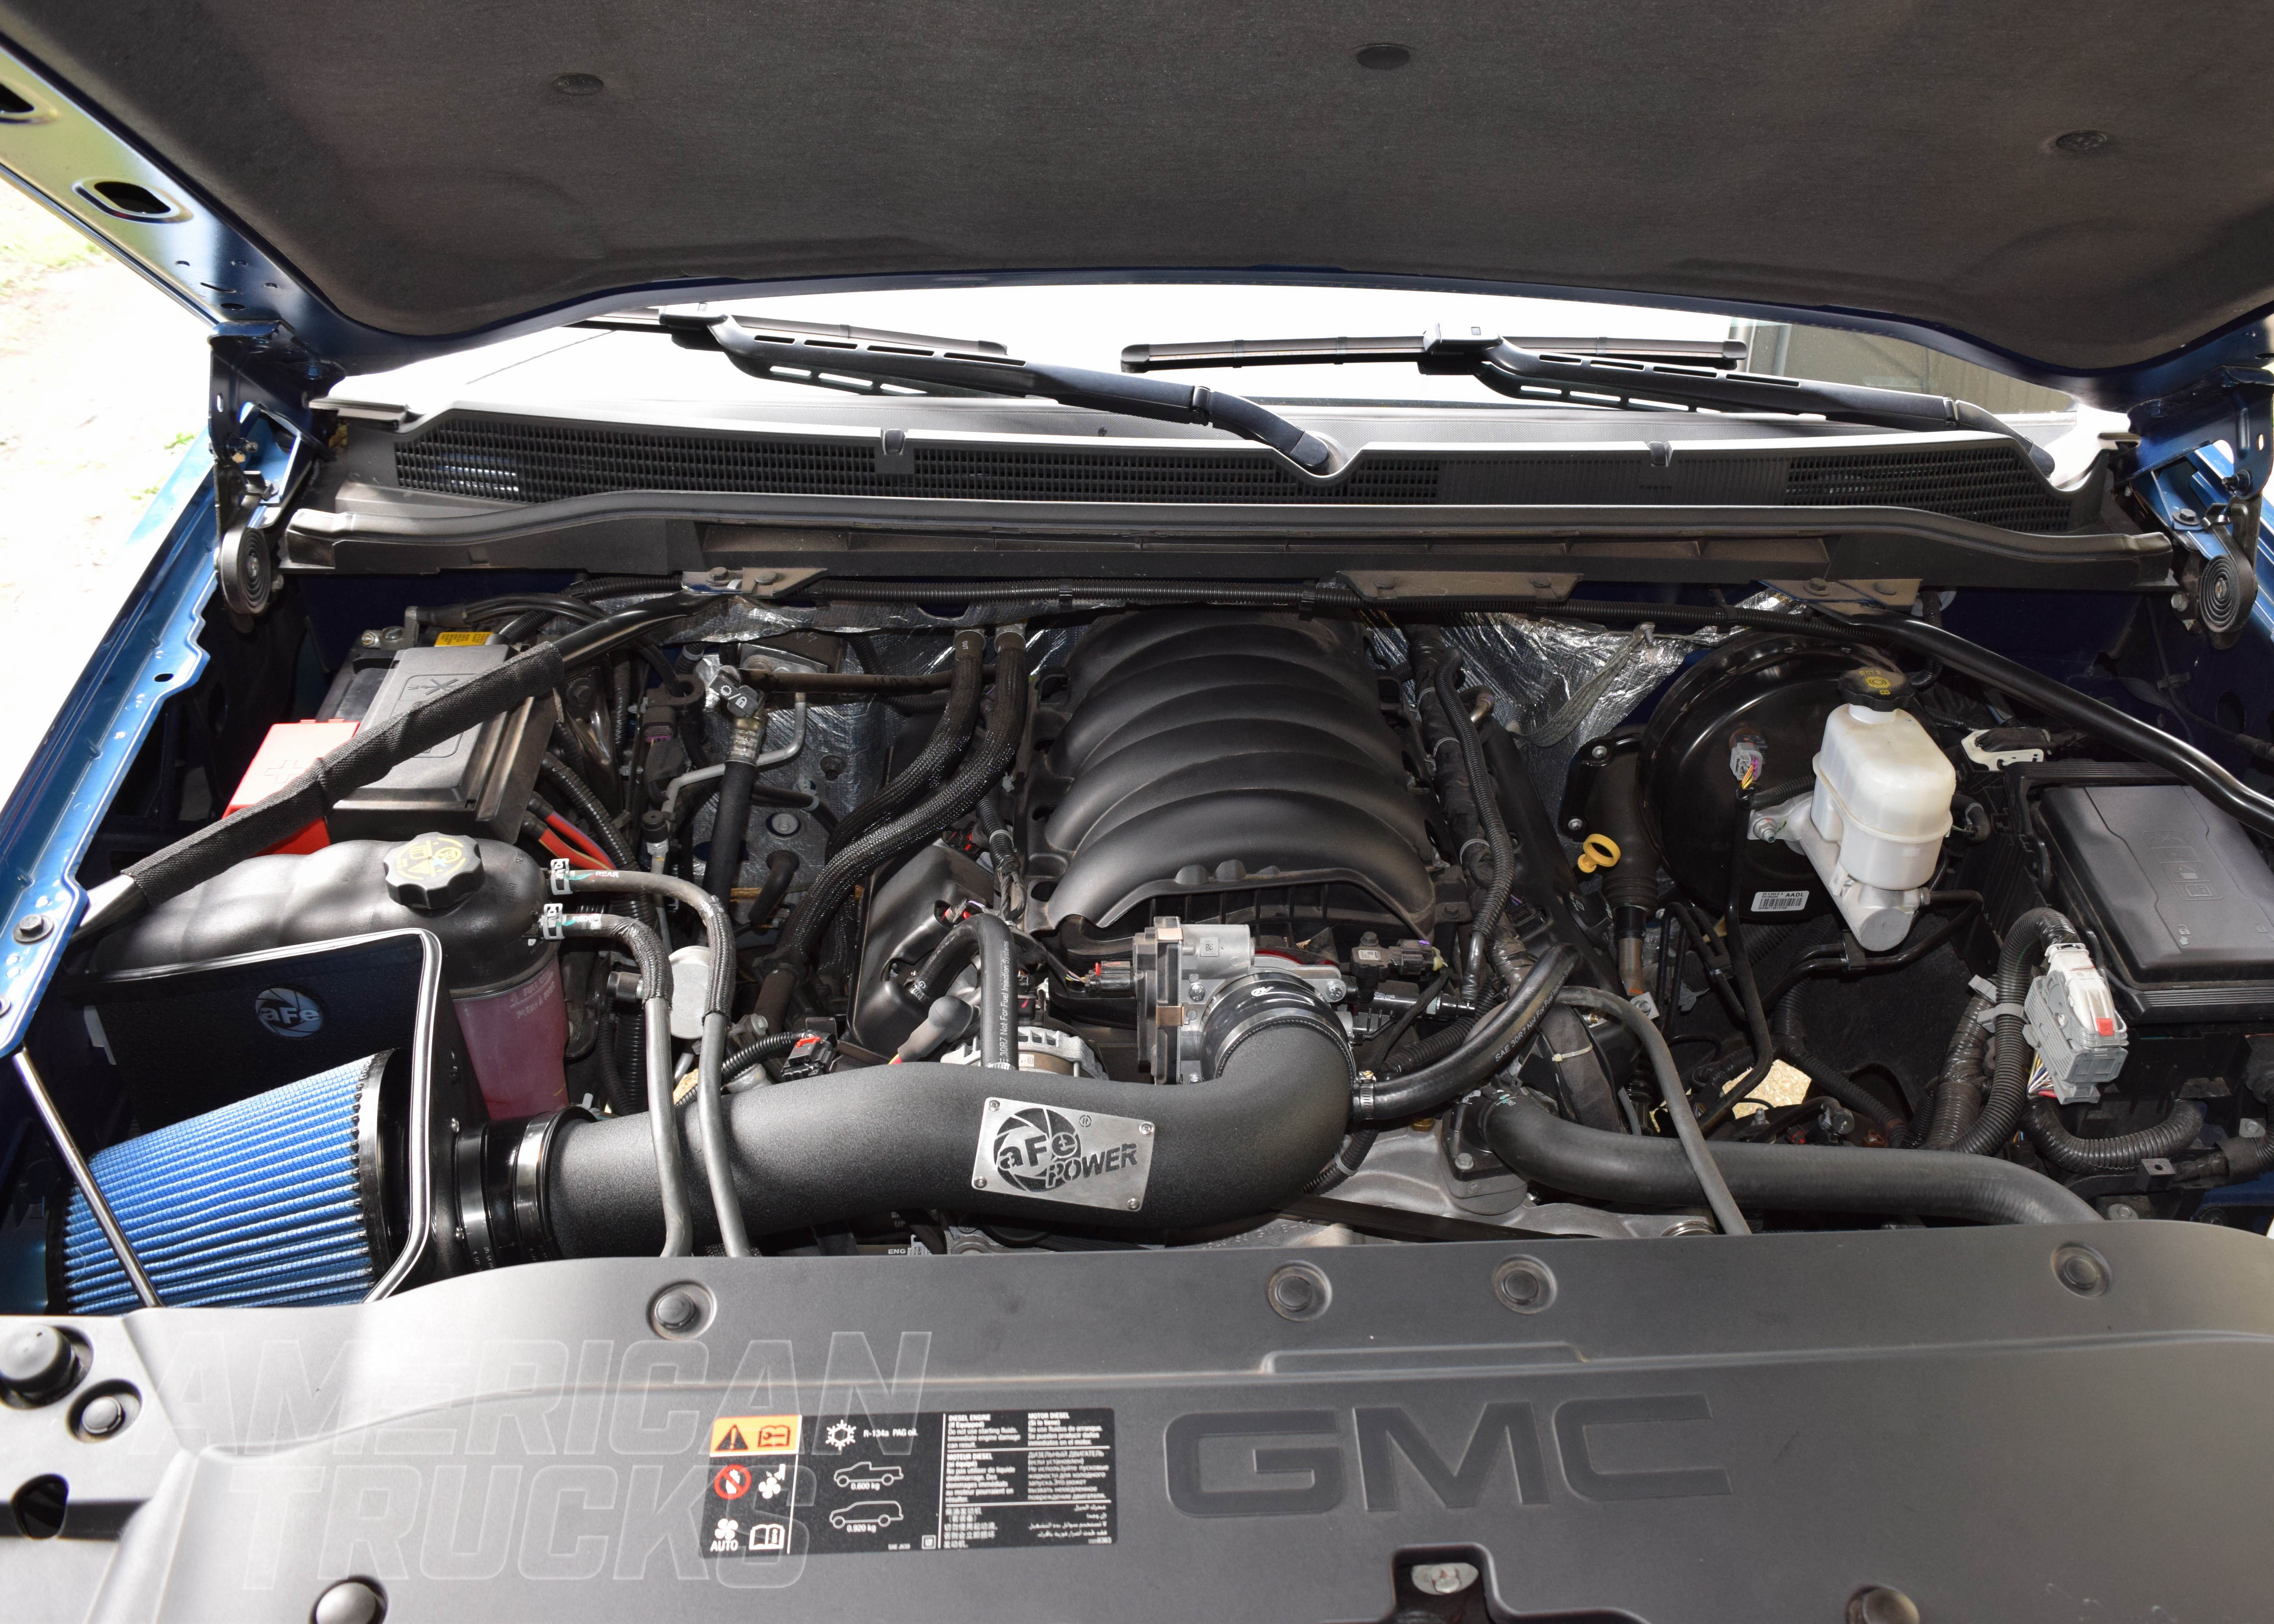 Sierra 14 Present Enginebay With Aftermarket Cold Air Intake